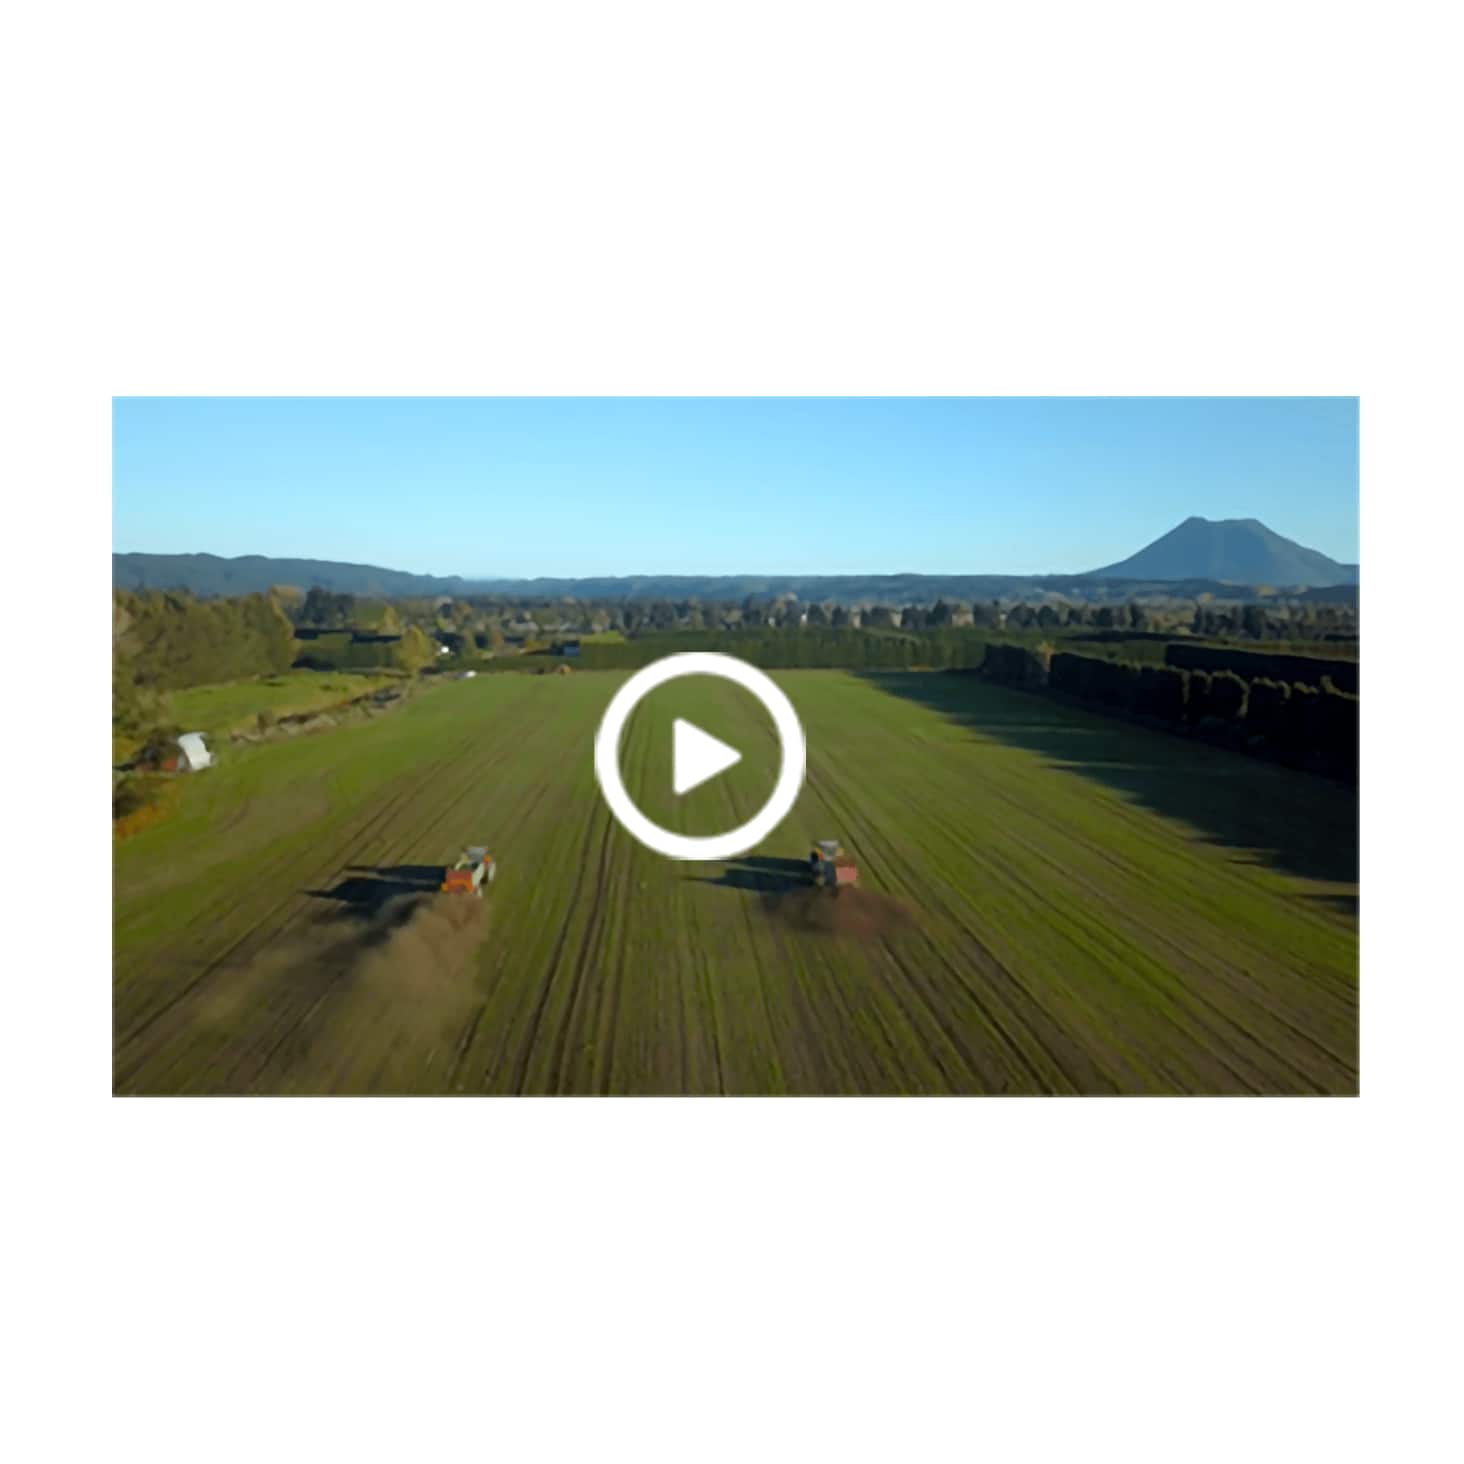 A still from the Xero for farming video shows machinery working a paddock.